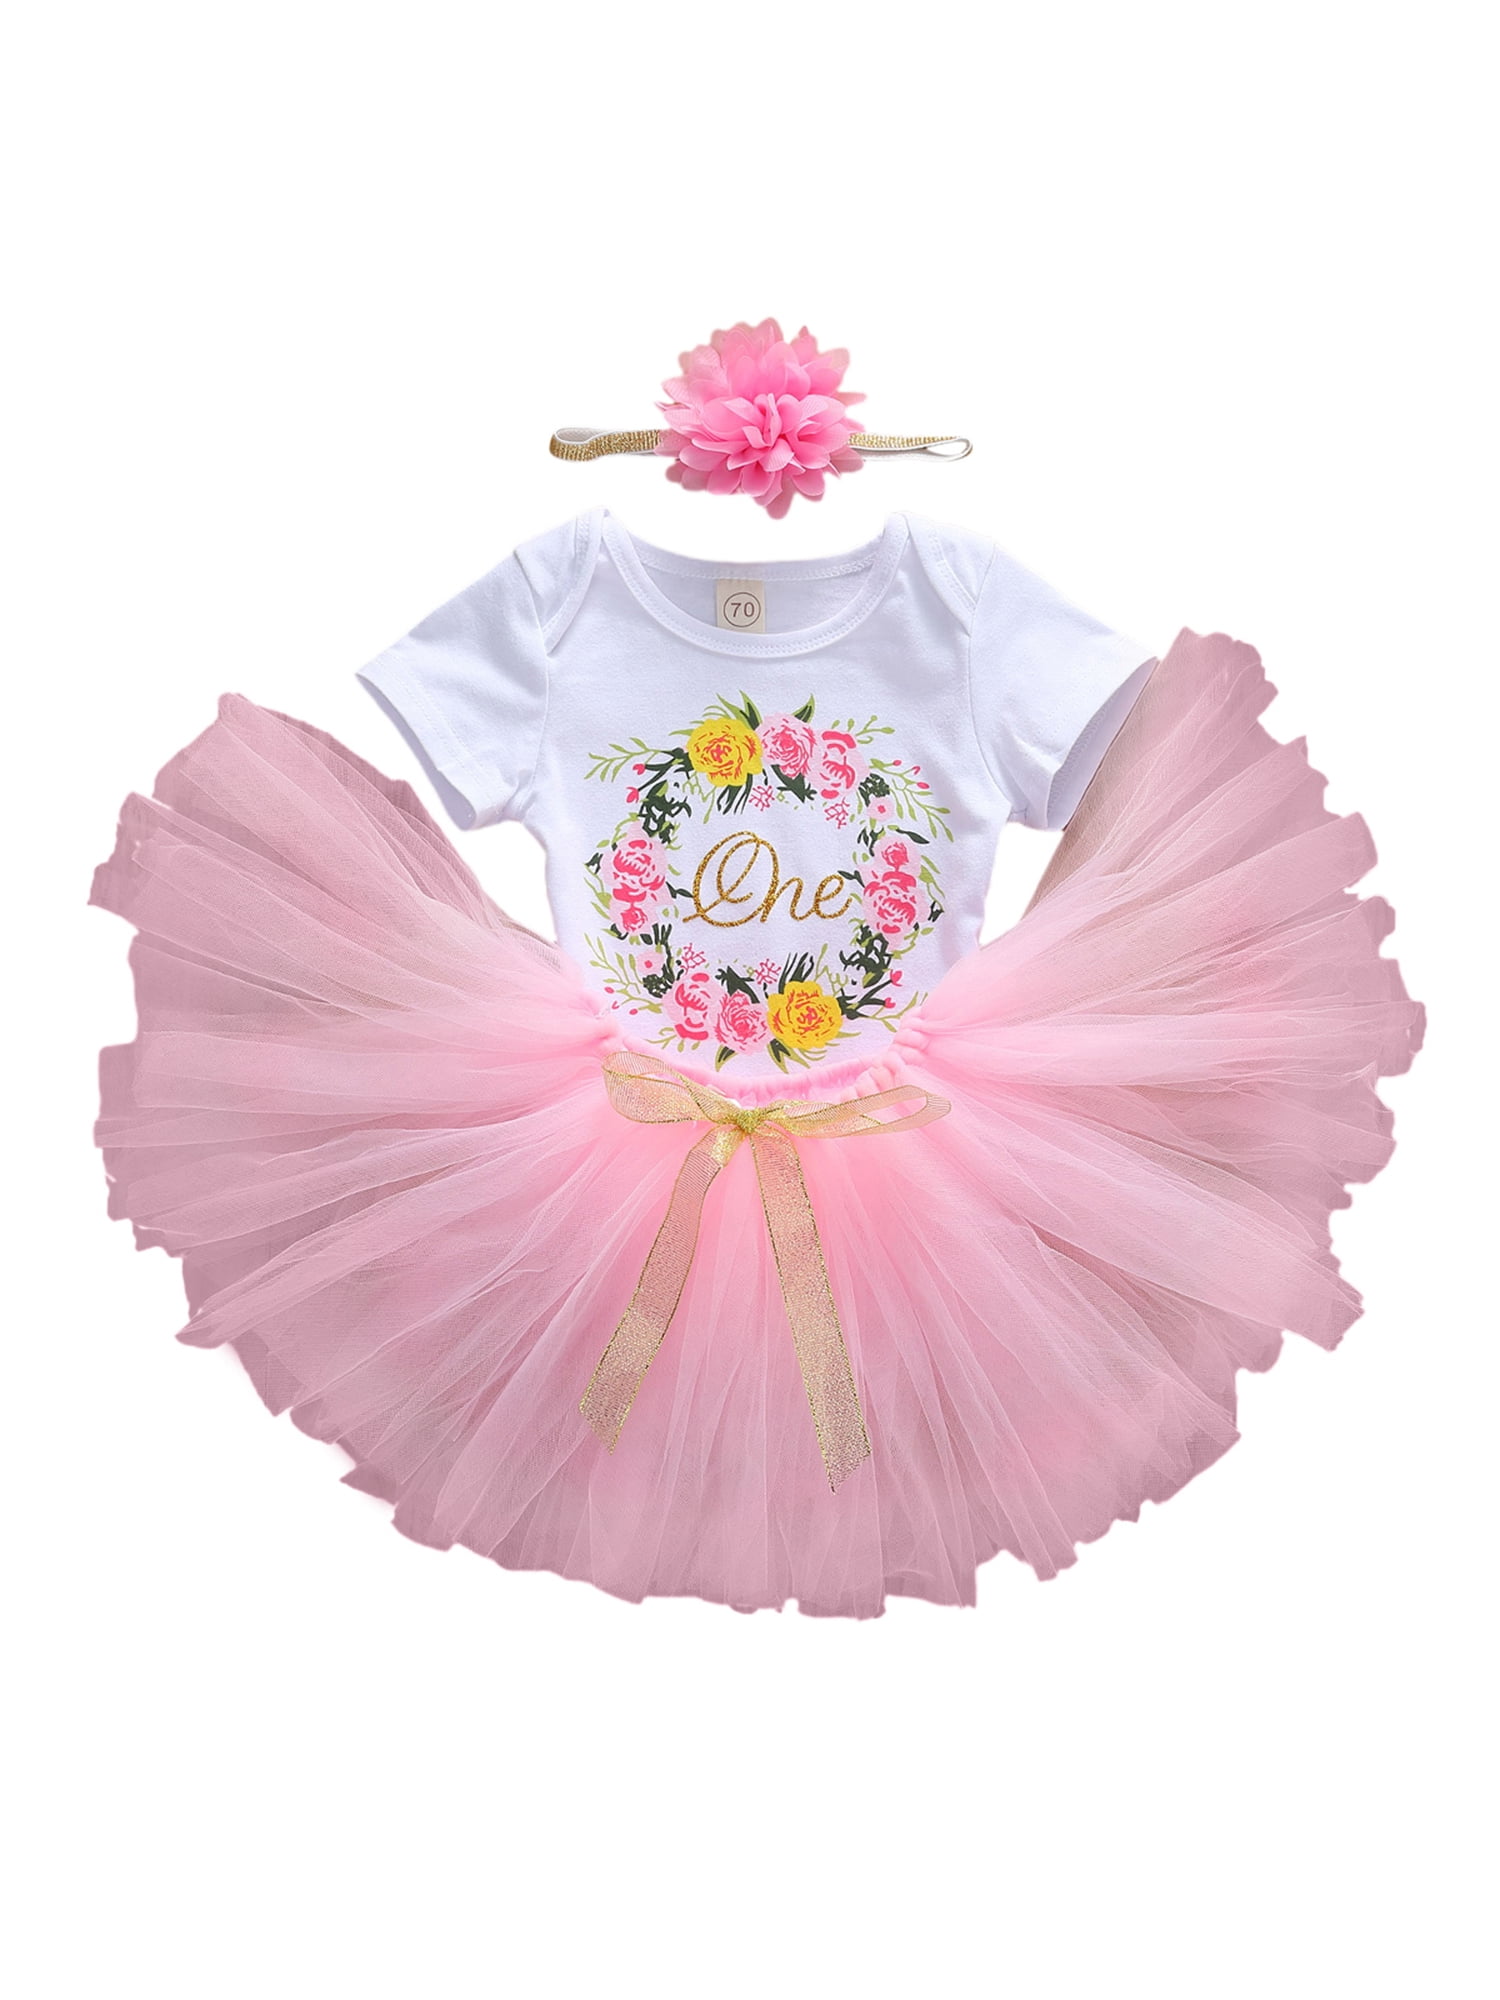 CLEARANCE PRICED floral Fabric Tutu Skirt Outfit w headband Baby Outfit toddler Outfit Tutu Skirt for first birthday